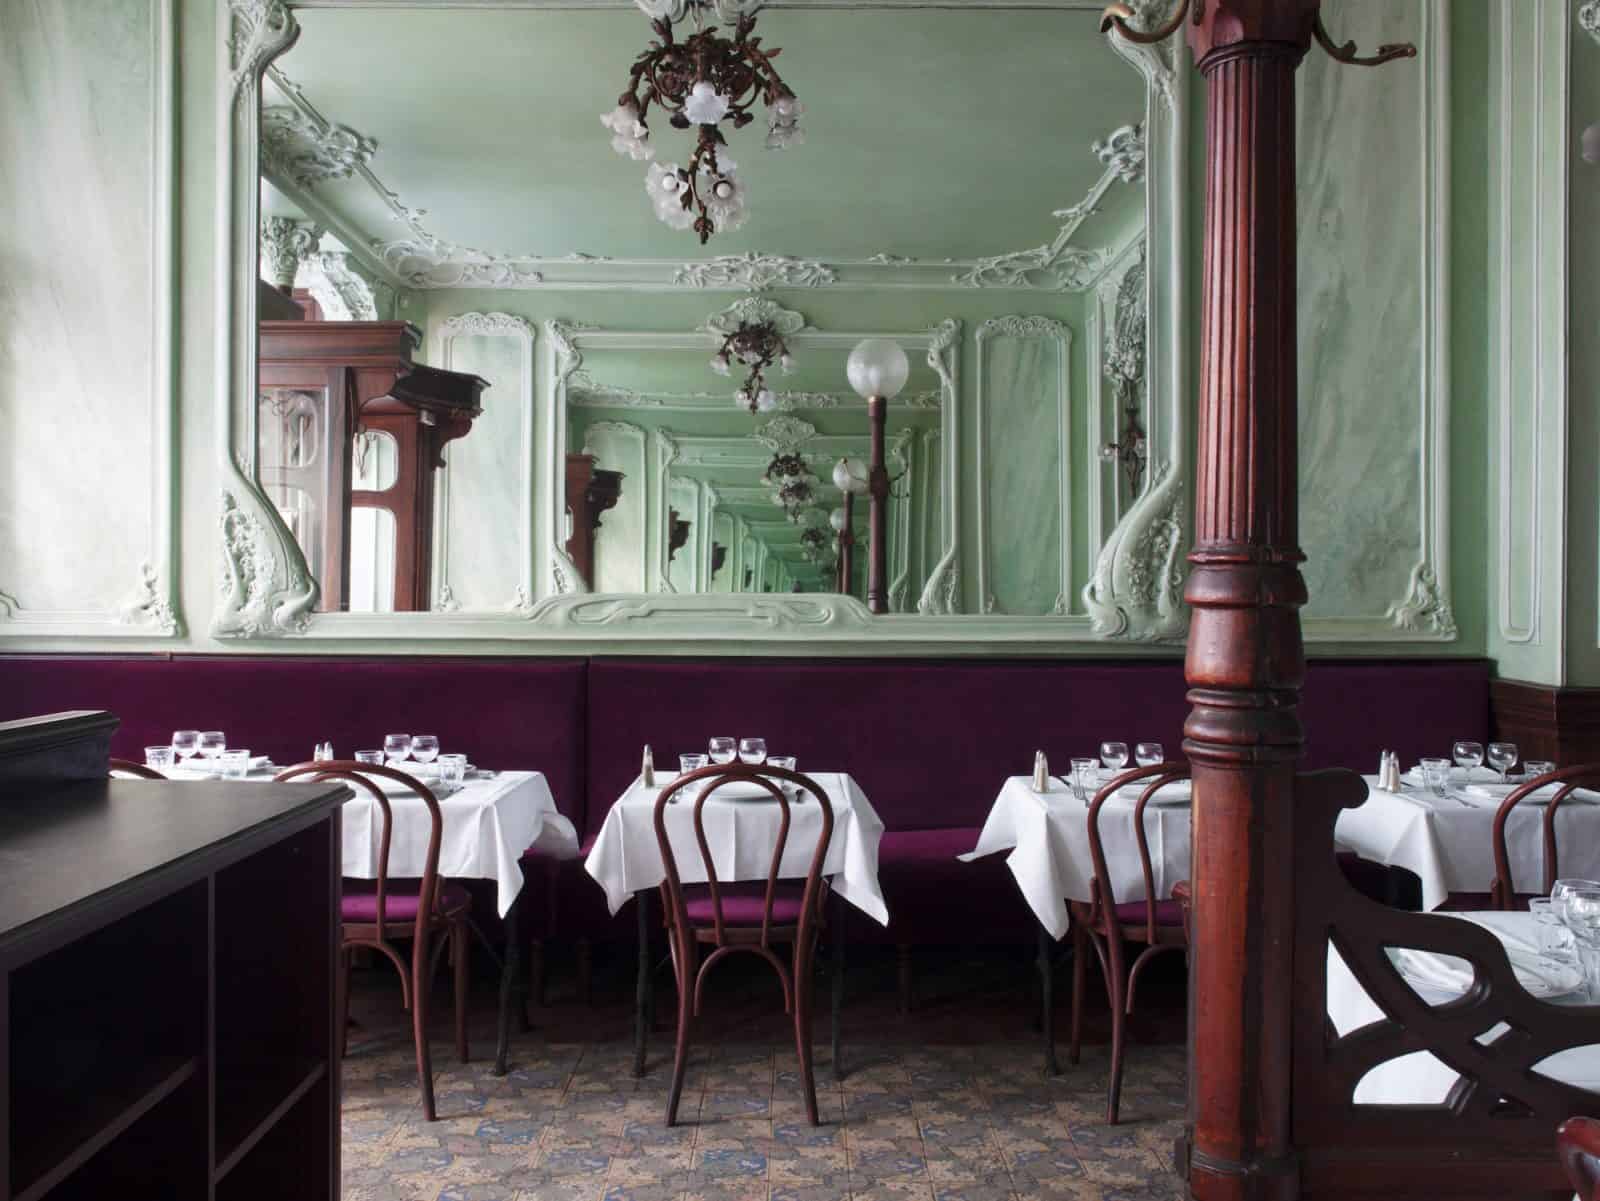 Bouillon Julien restaurant in Paris comes with spectacular Art Nouveau interiors and classic French food for travelers on a budget.